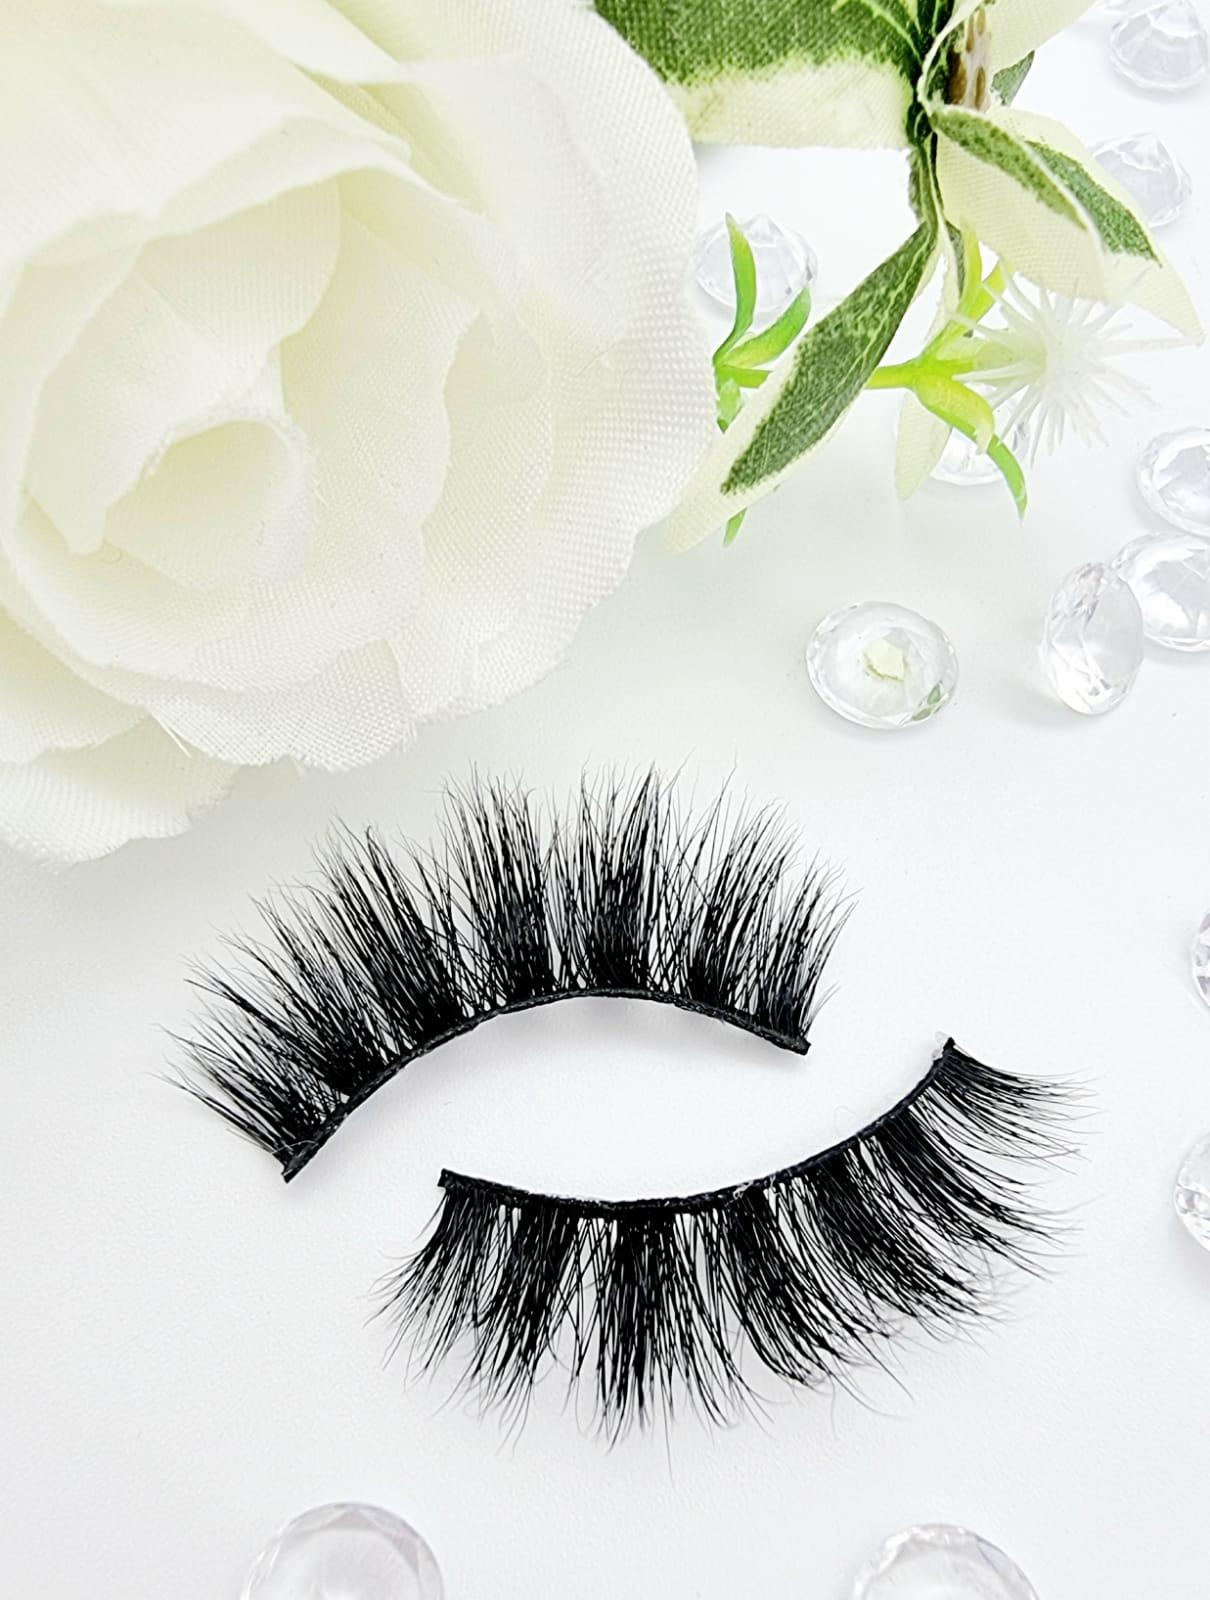 Lily-Rose lashes Premier Strip lashes by Lily-Rose with the party girl in mind  Lilly-Rose  Lashes are Glamorous 3D Lashes, . Mink Lashes and Faux Mink Lashes - Dramatic Lashes and Natural Lashes - Strip Lashes